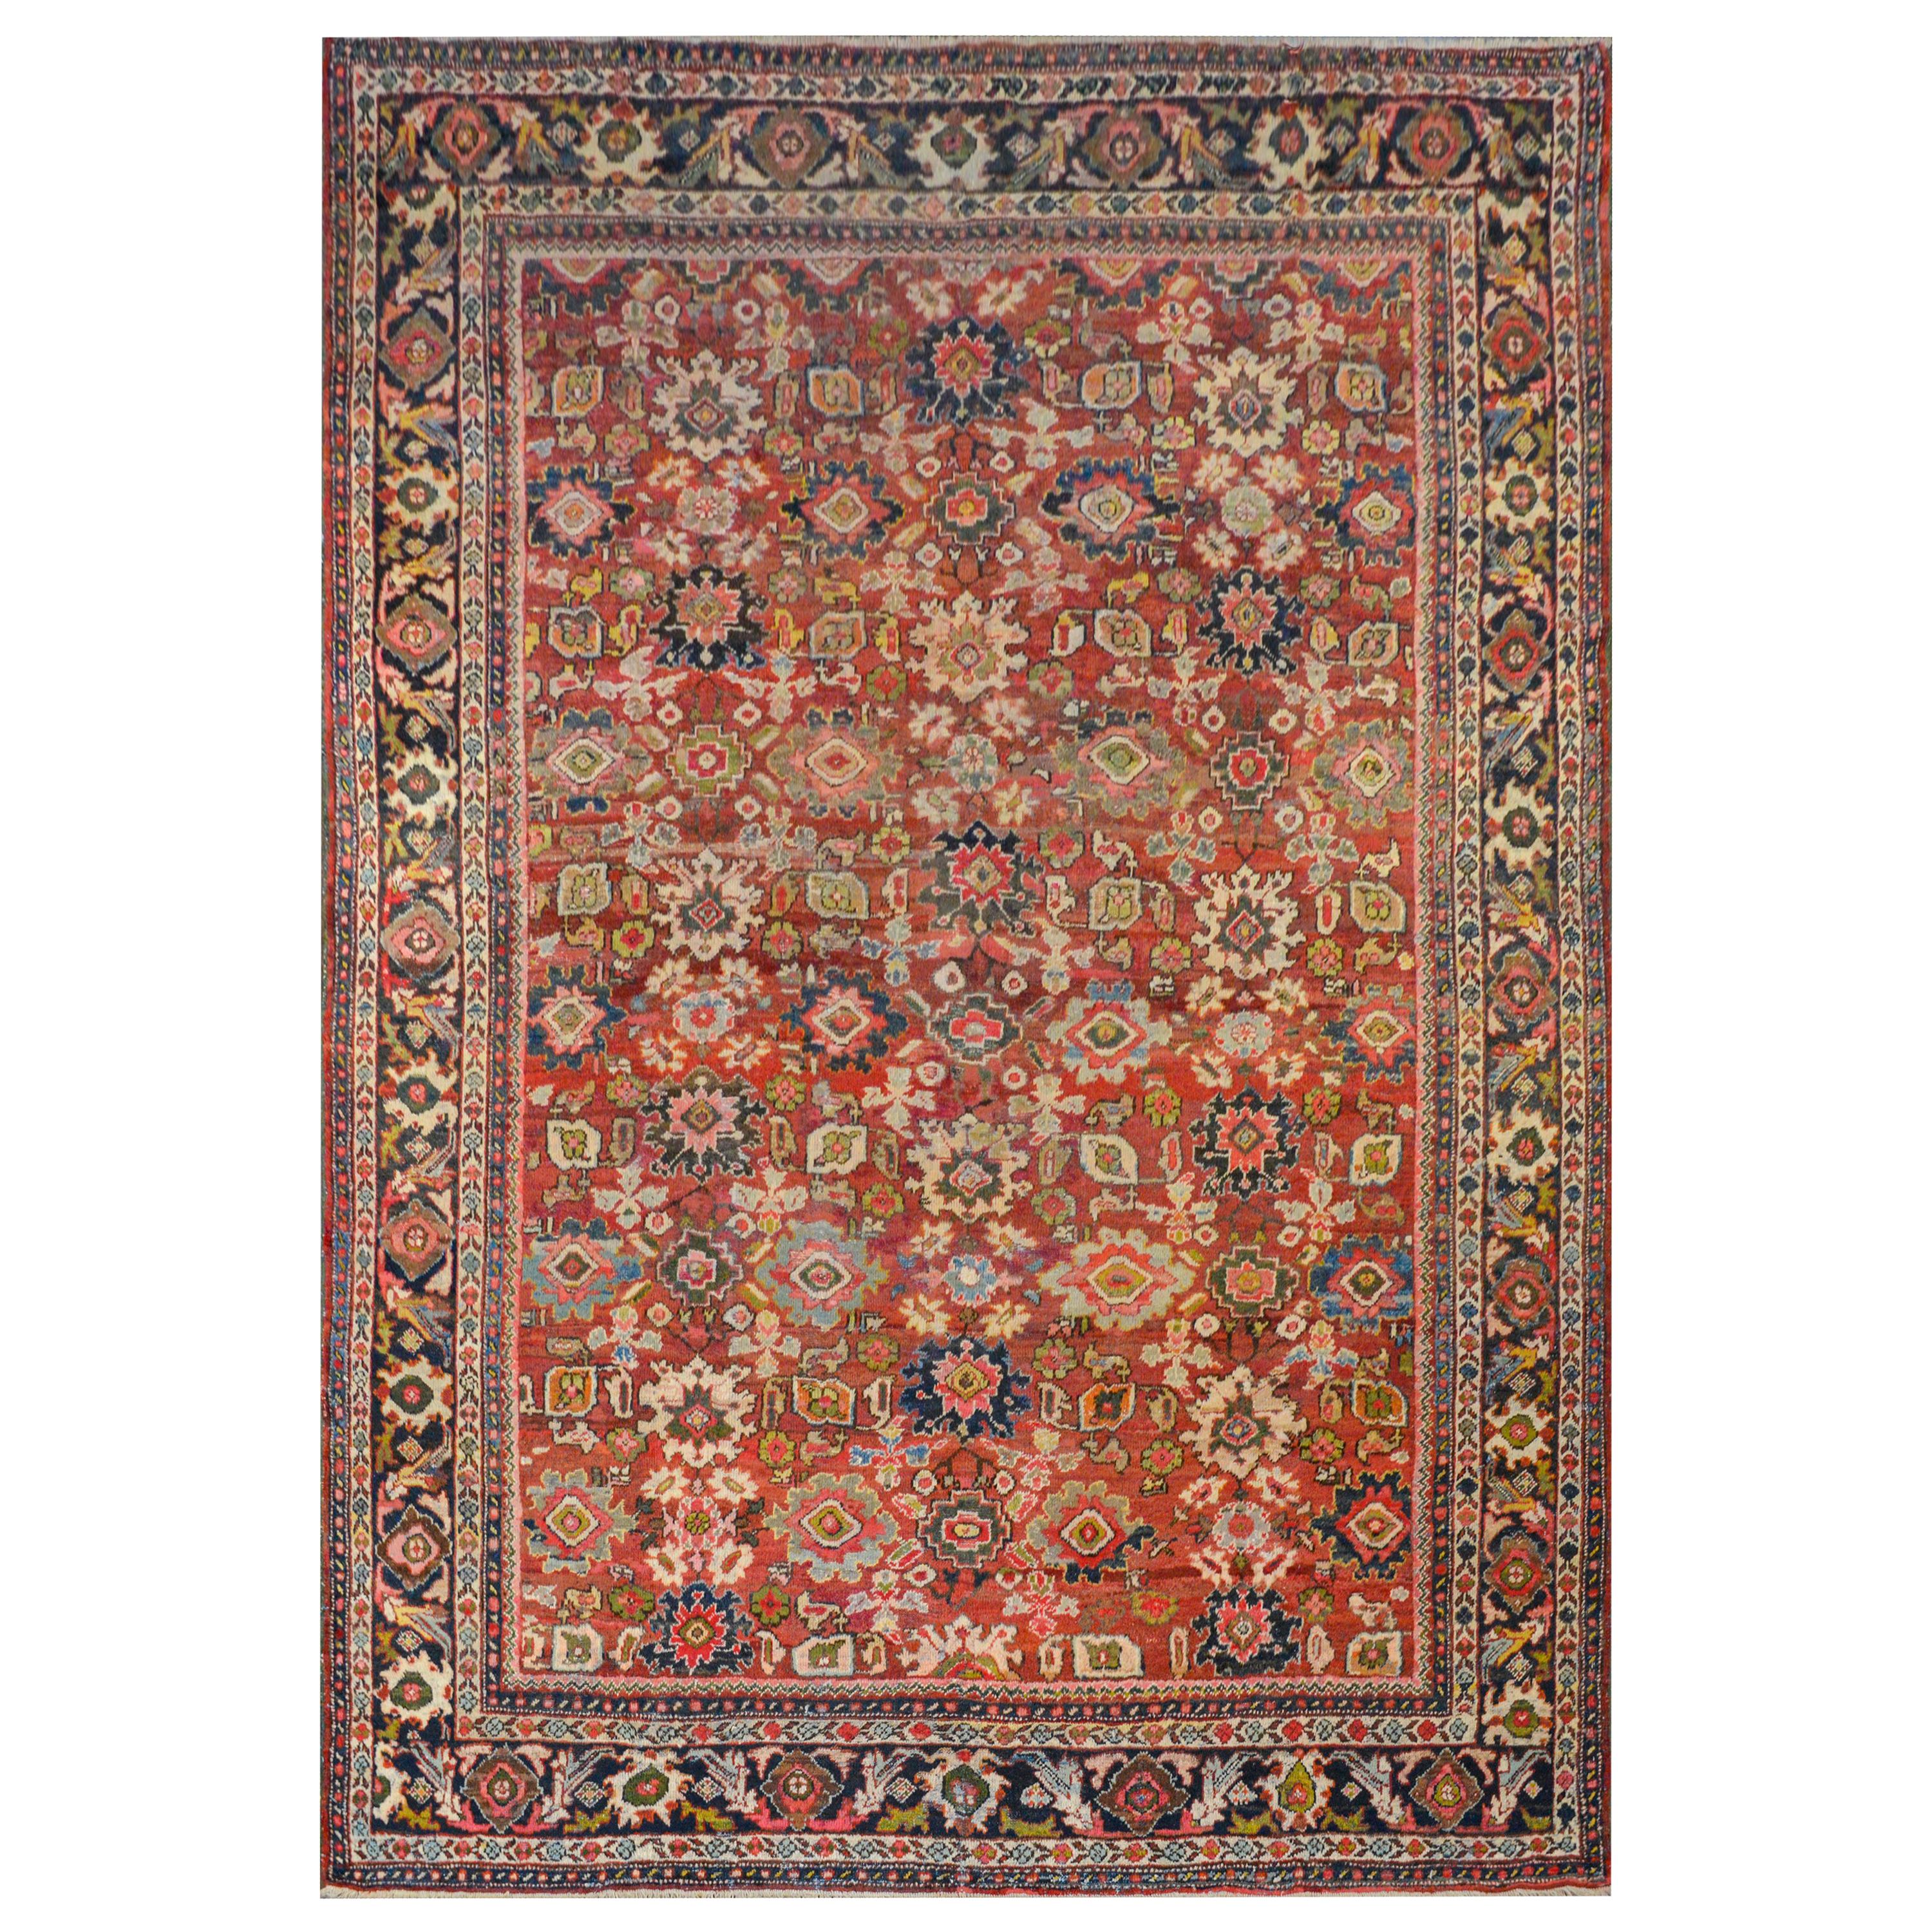 Outstanding Early 20th Century Mahal Rug